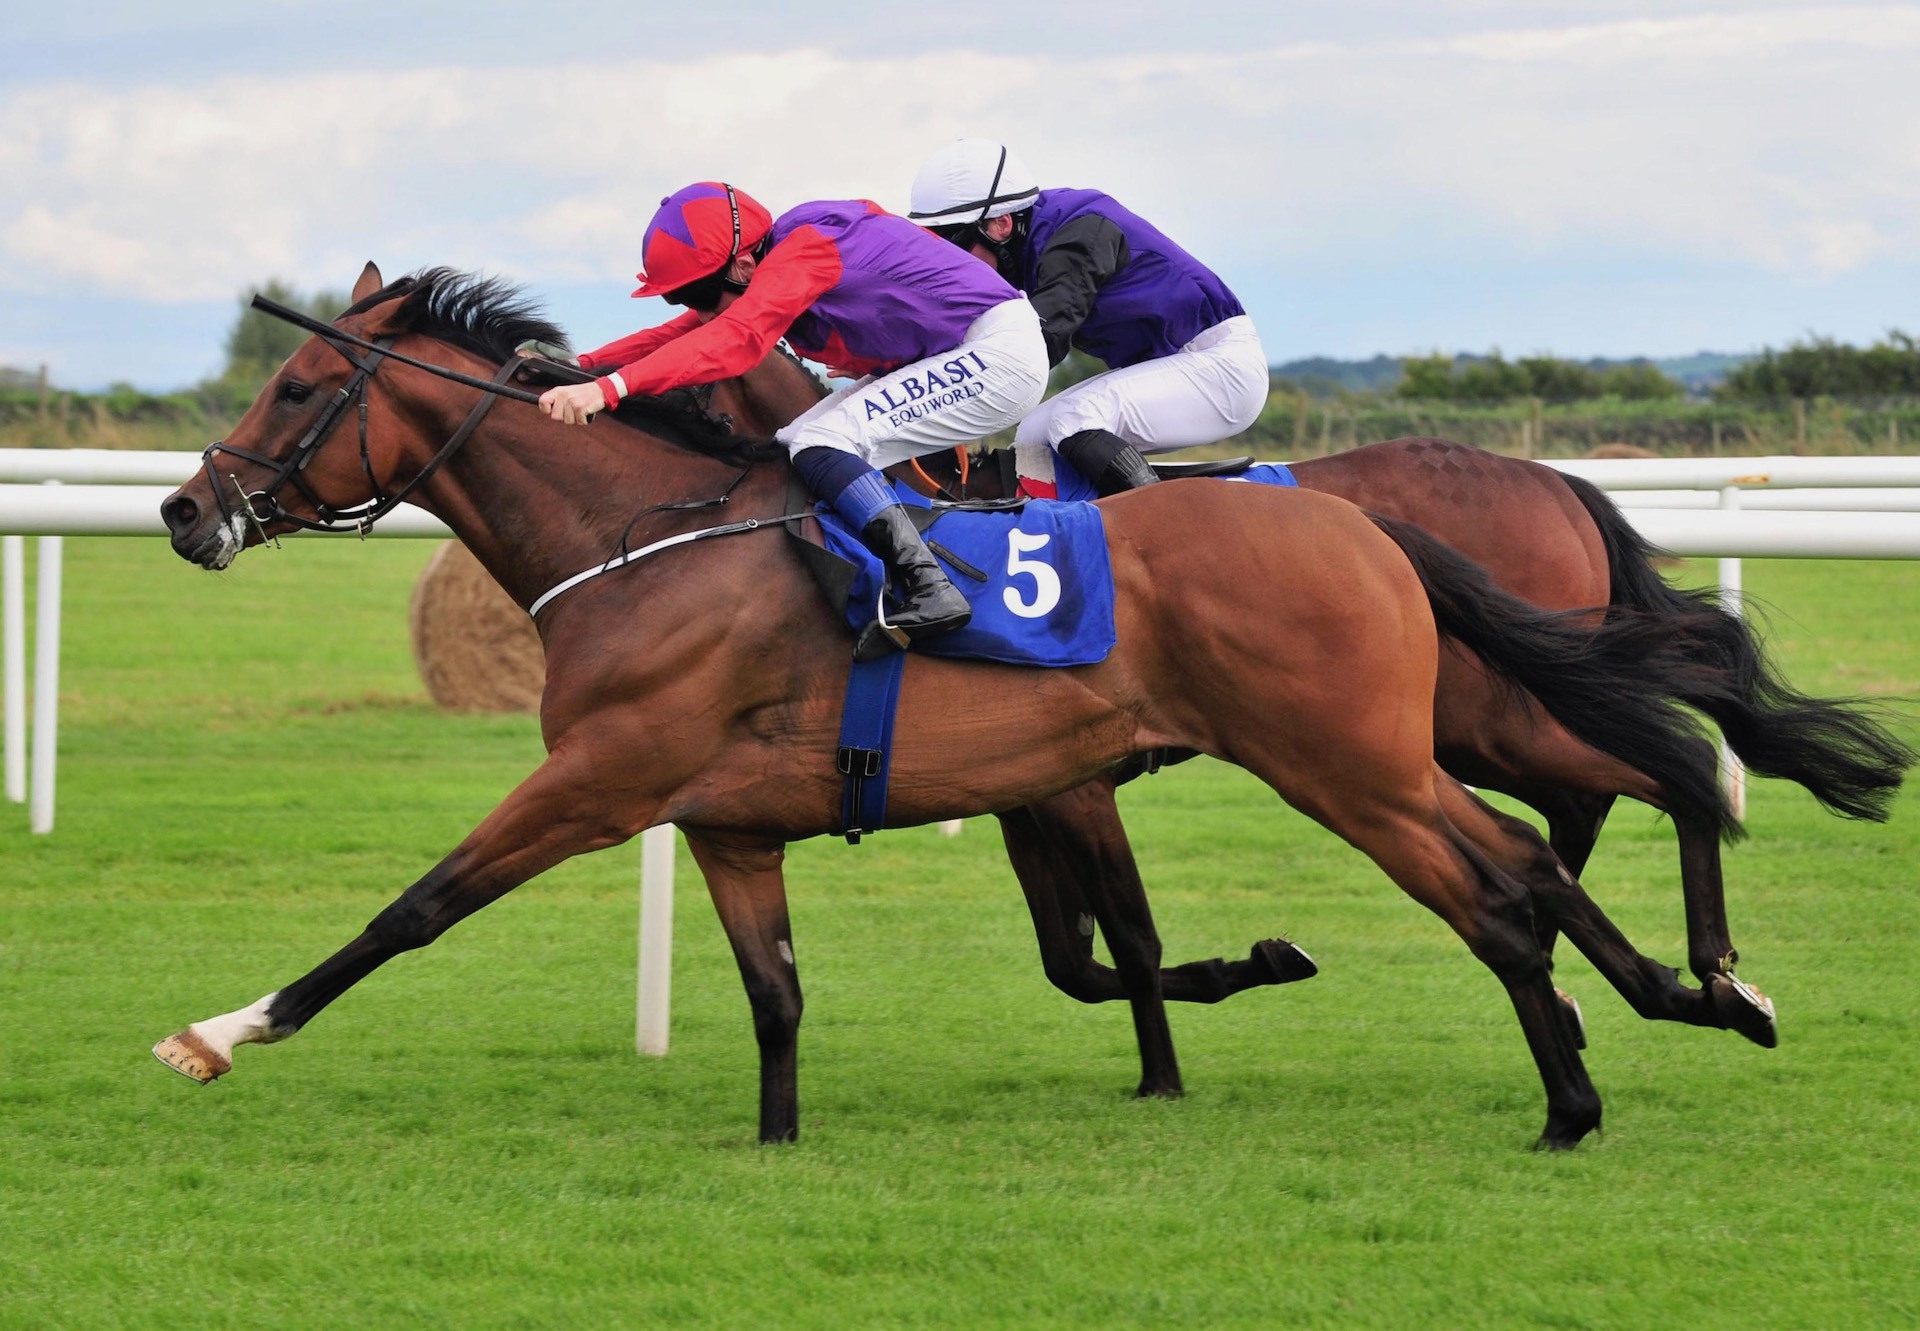 Teed Up (Gleneagles) Wins His Maiden At Roscommon